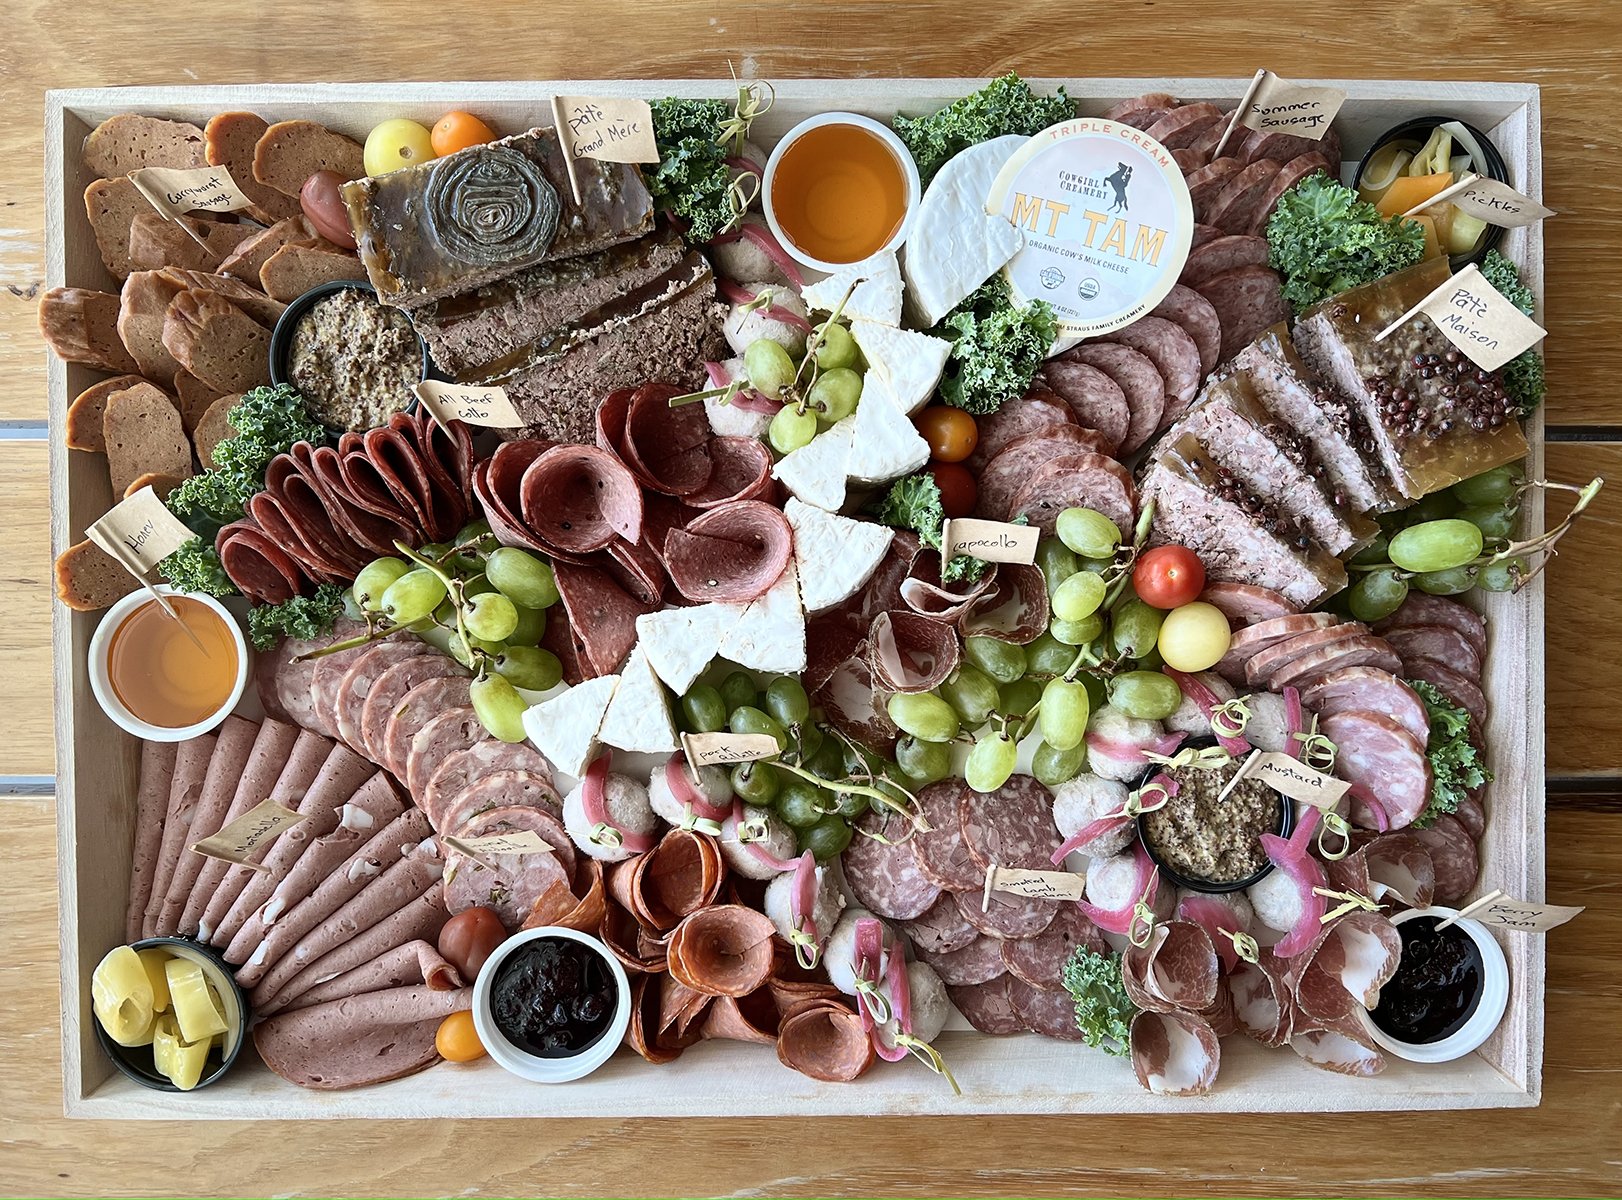 A board of sliced meats, fruits, and cheeses.